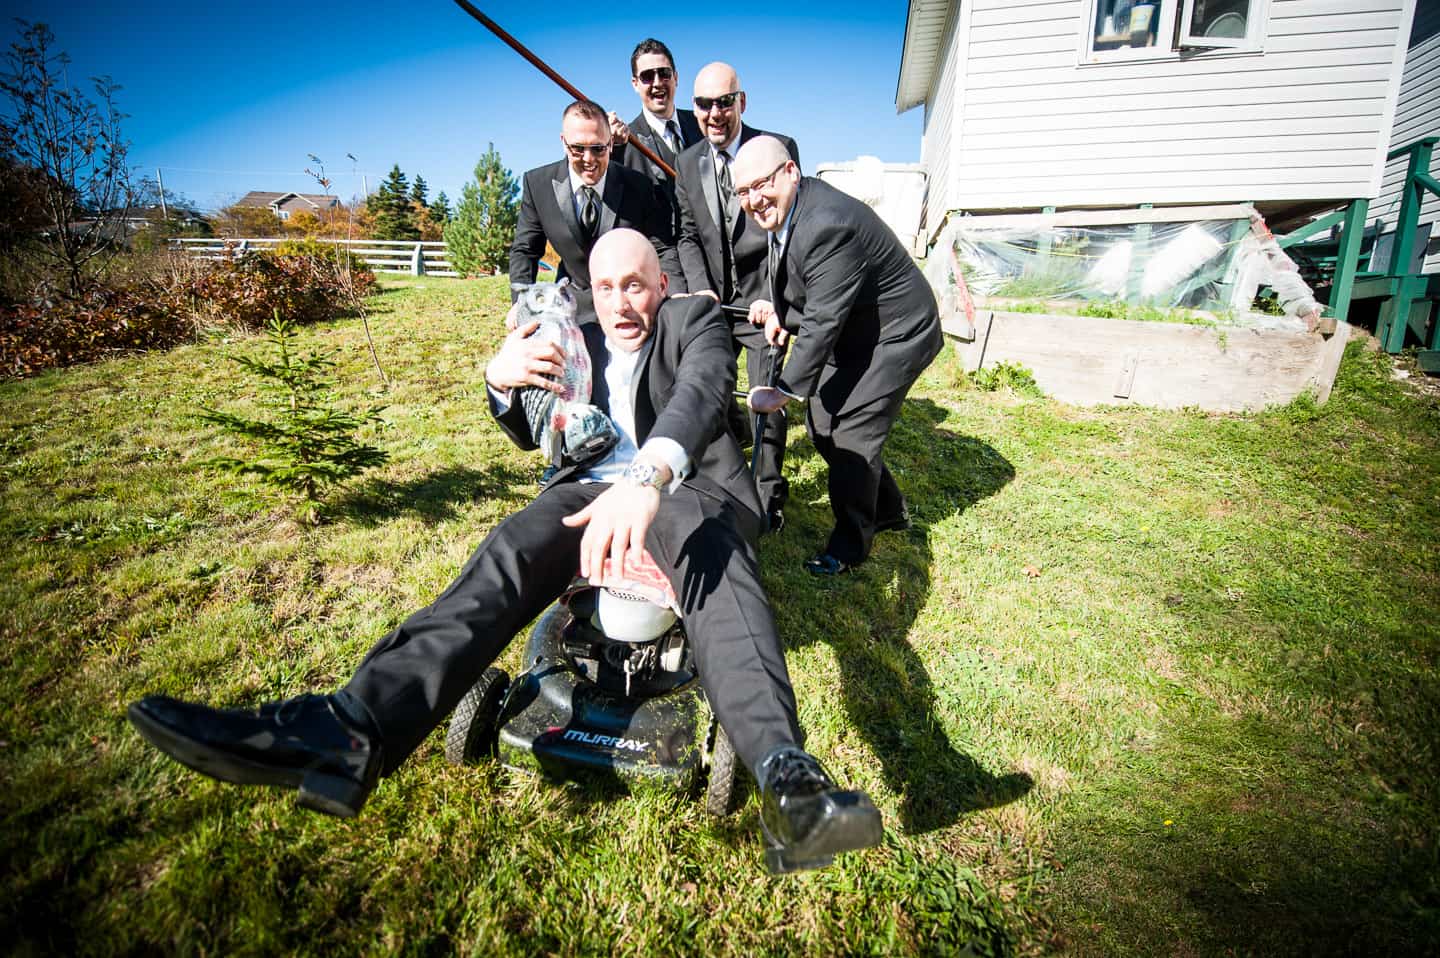 A group of groomsmen push the groom-to-be down a hill on a lawnmower while he holds an owl statue in this hilarious Newfoundland wedding photo.